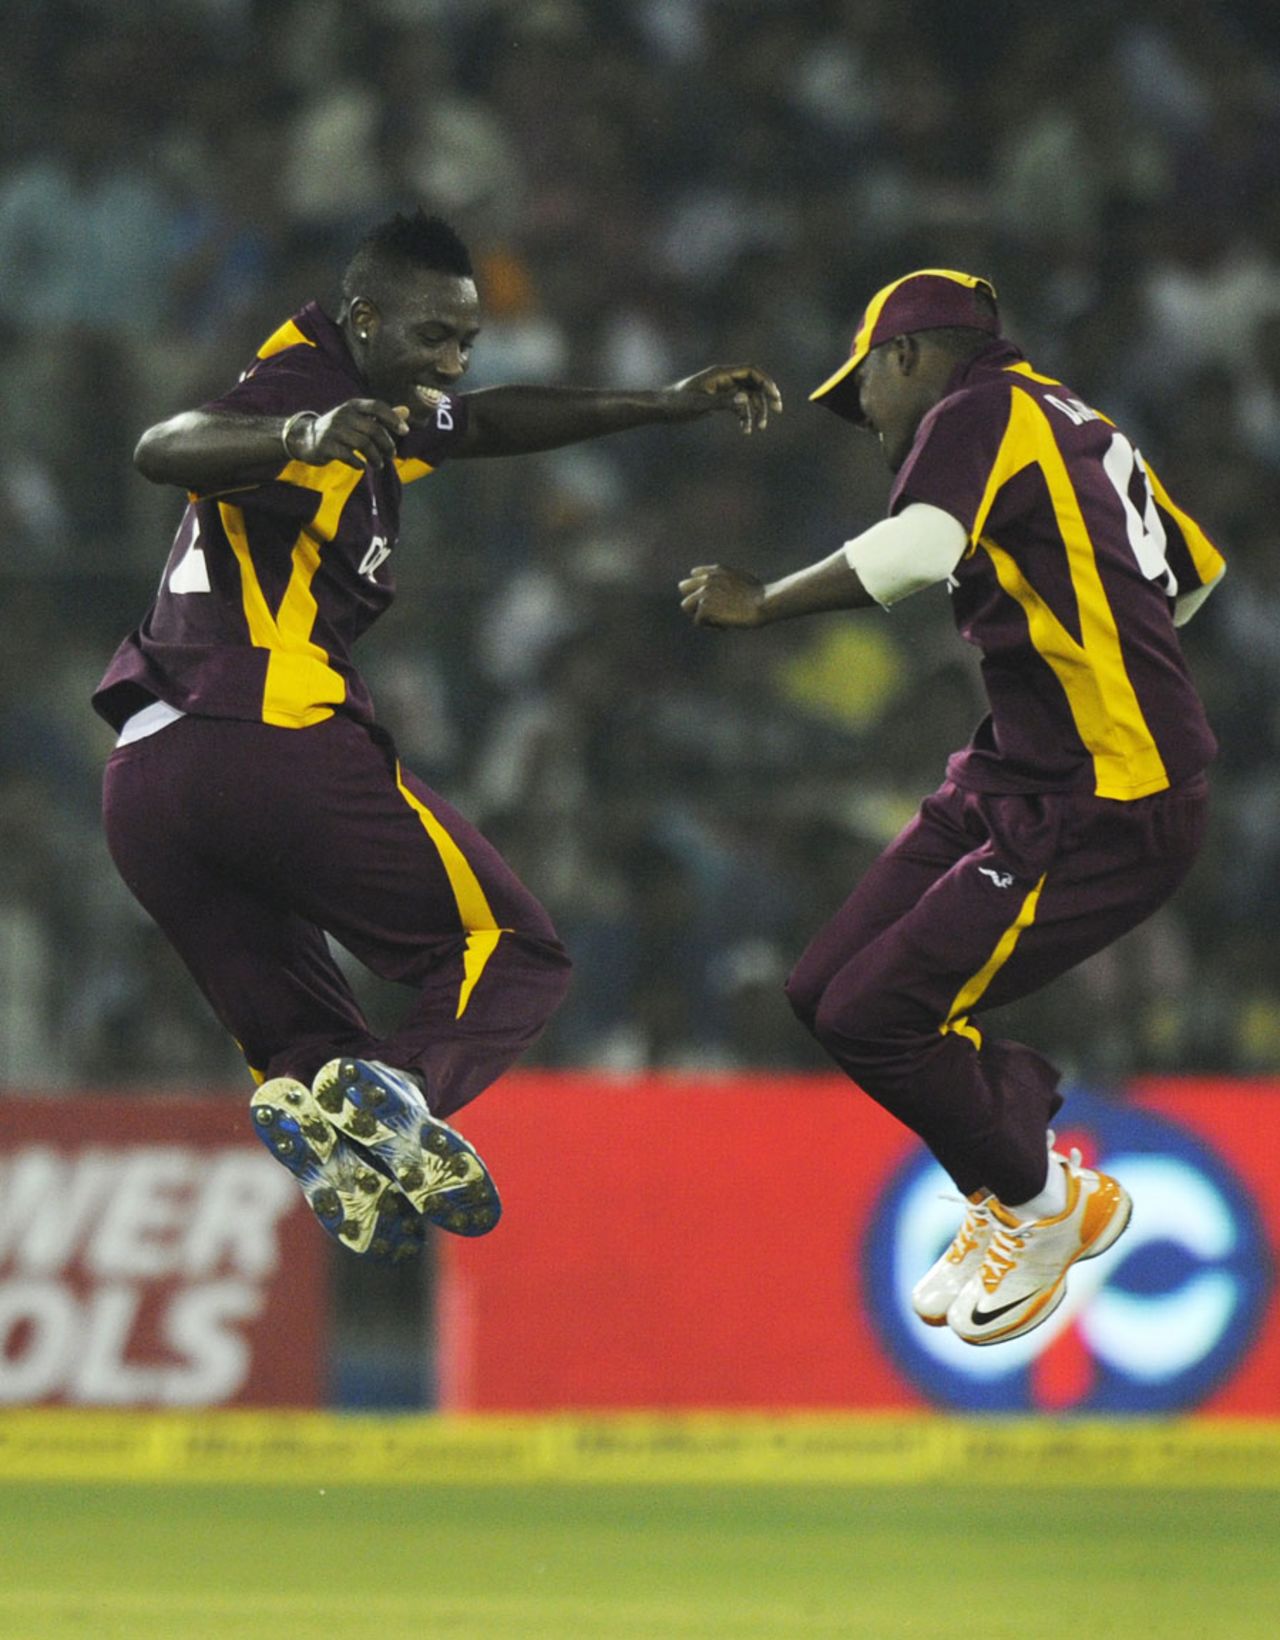 Andre Russell and Darren Bravo celebrate a wicket, India v West Indies, 1st ODI, Cuttack, November 29, 2011